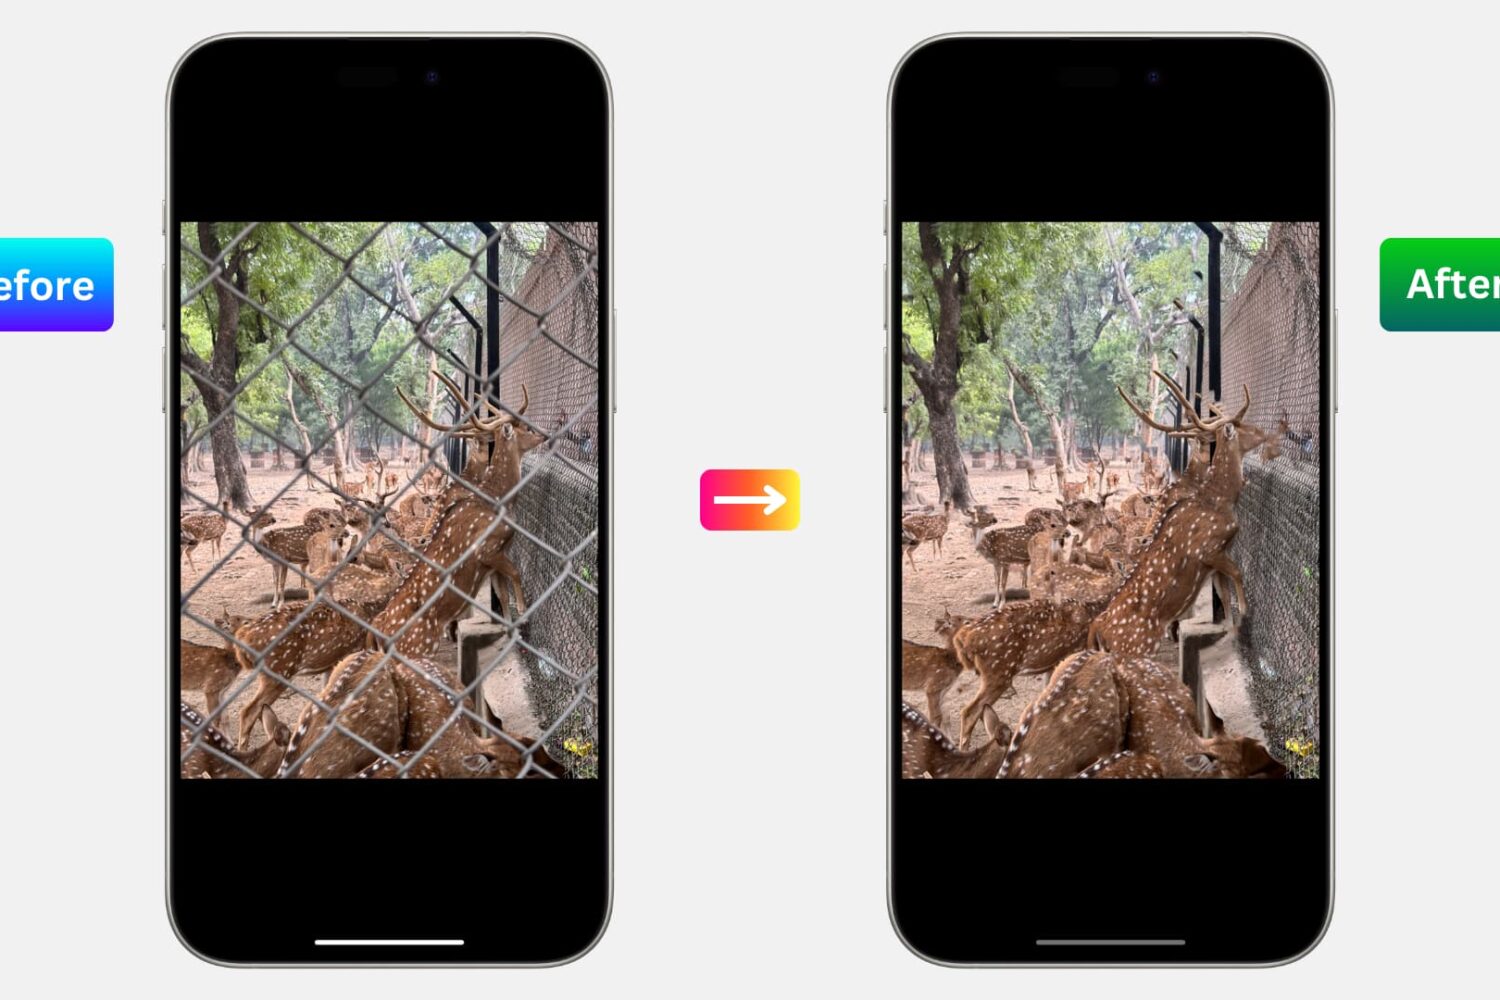 Remove unwanted objects from photos on iPhone